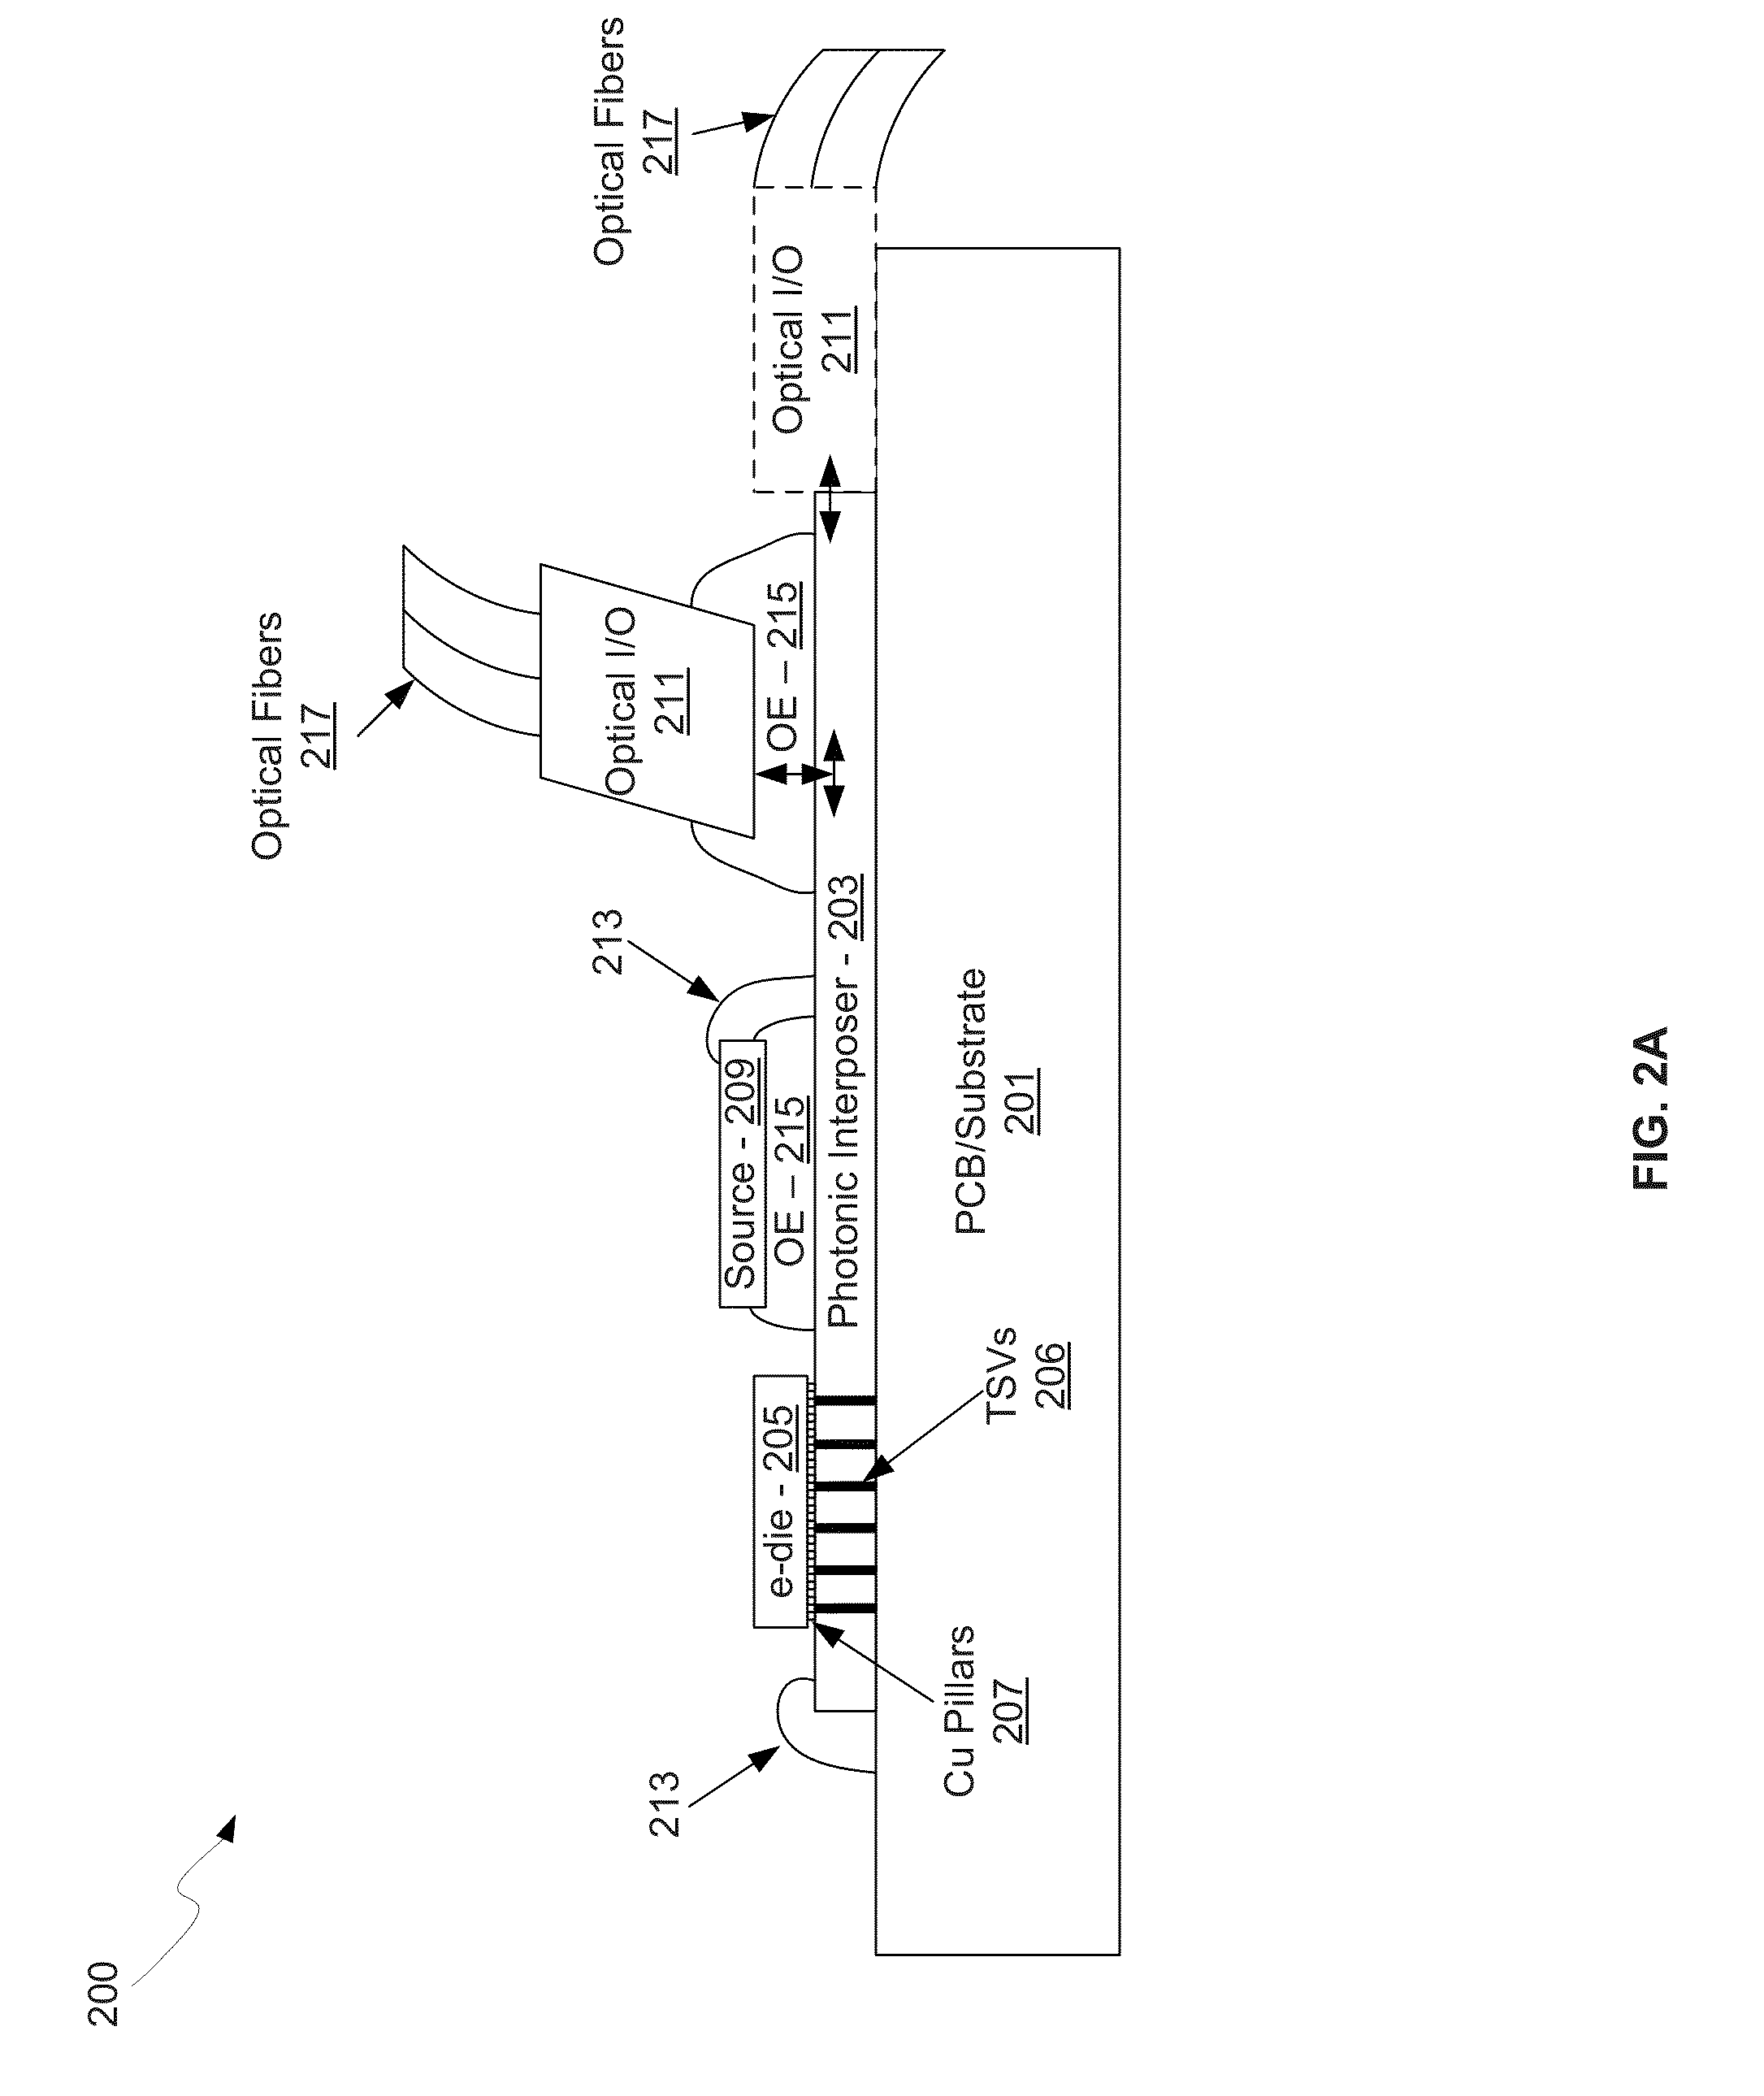 Method and system for a photonic interposer